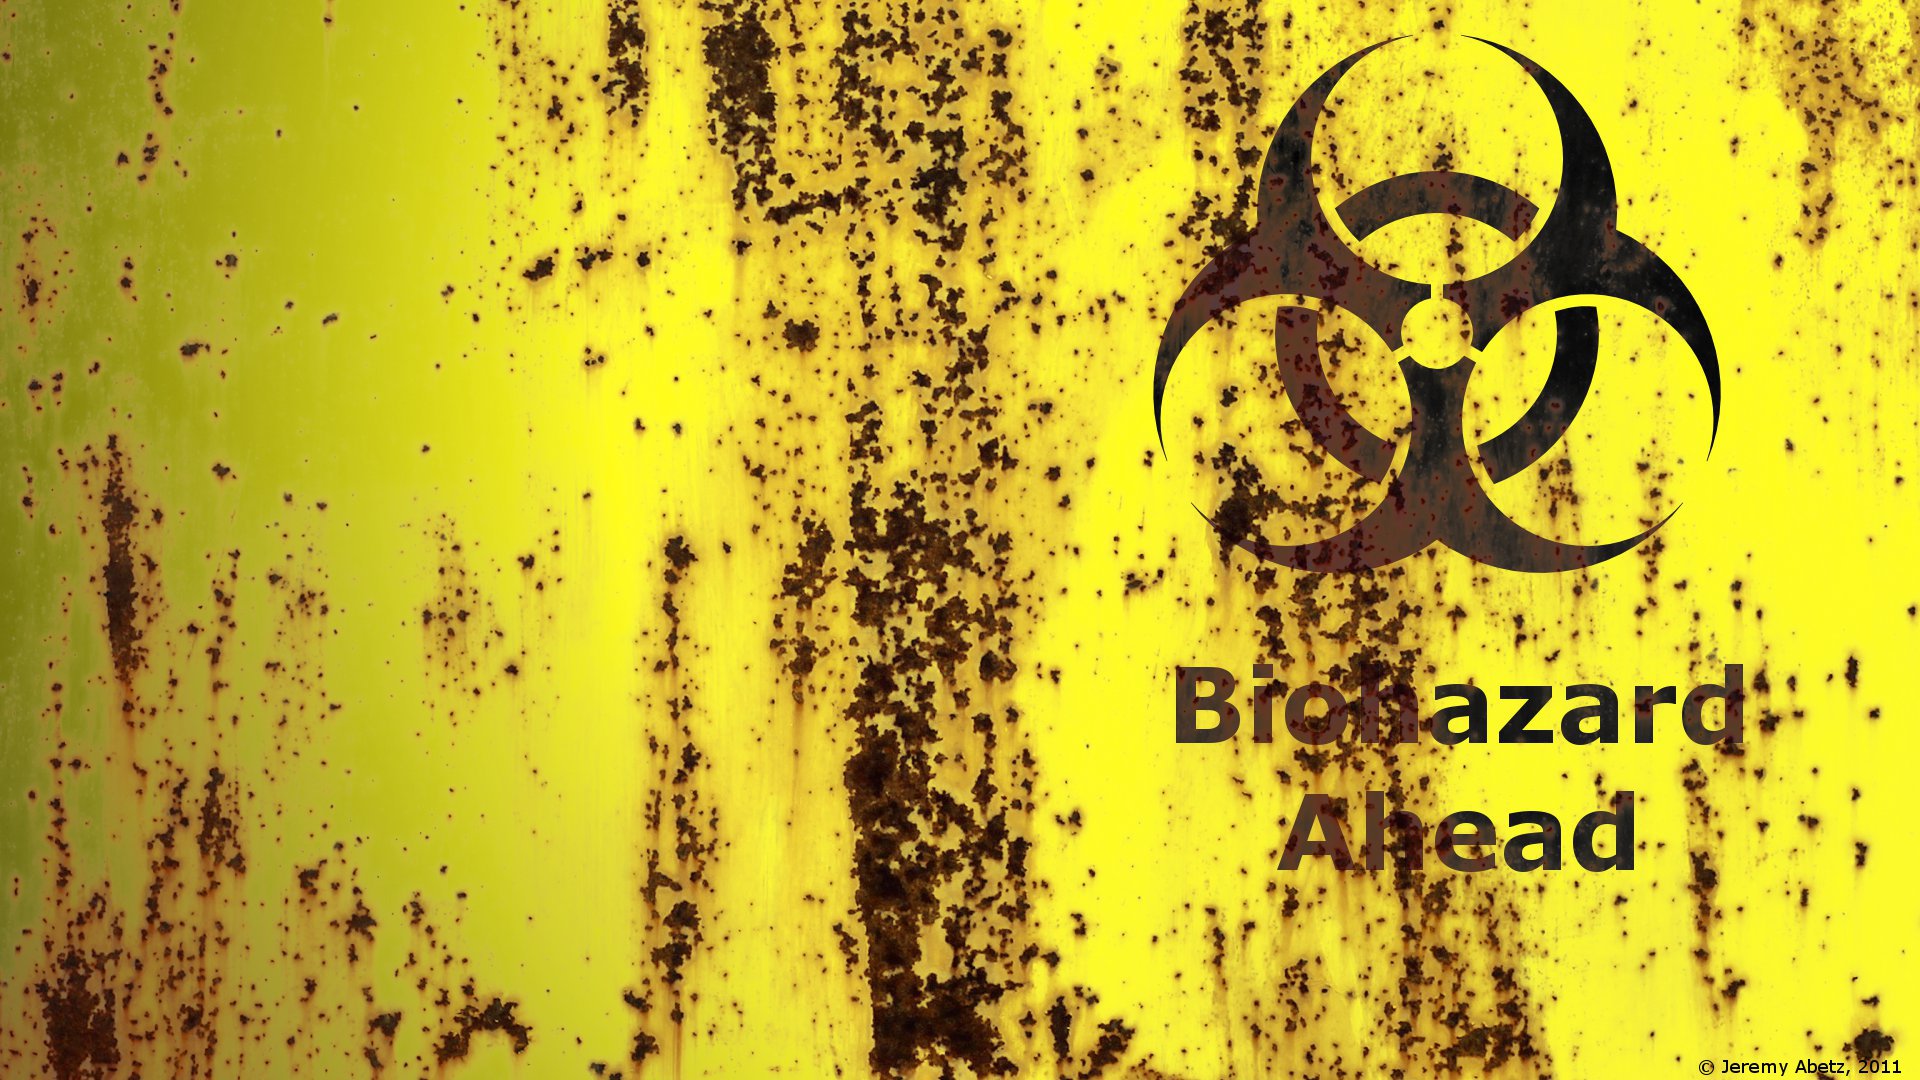 US Violating the Biological Weapons Convention, NGO Asserts